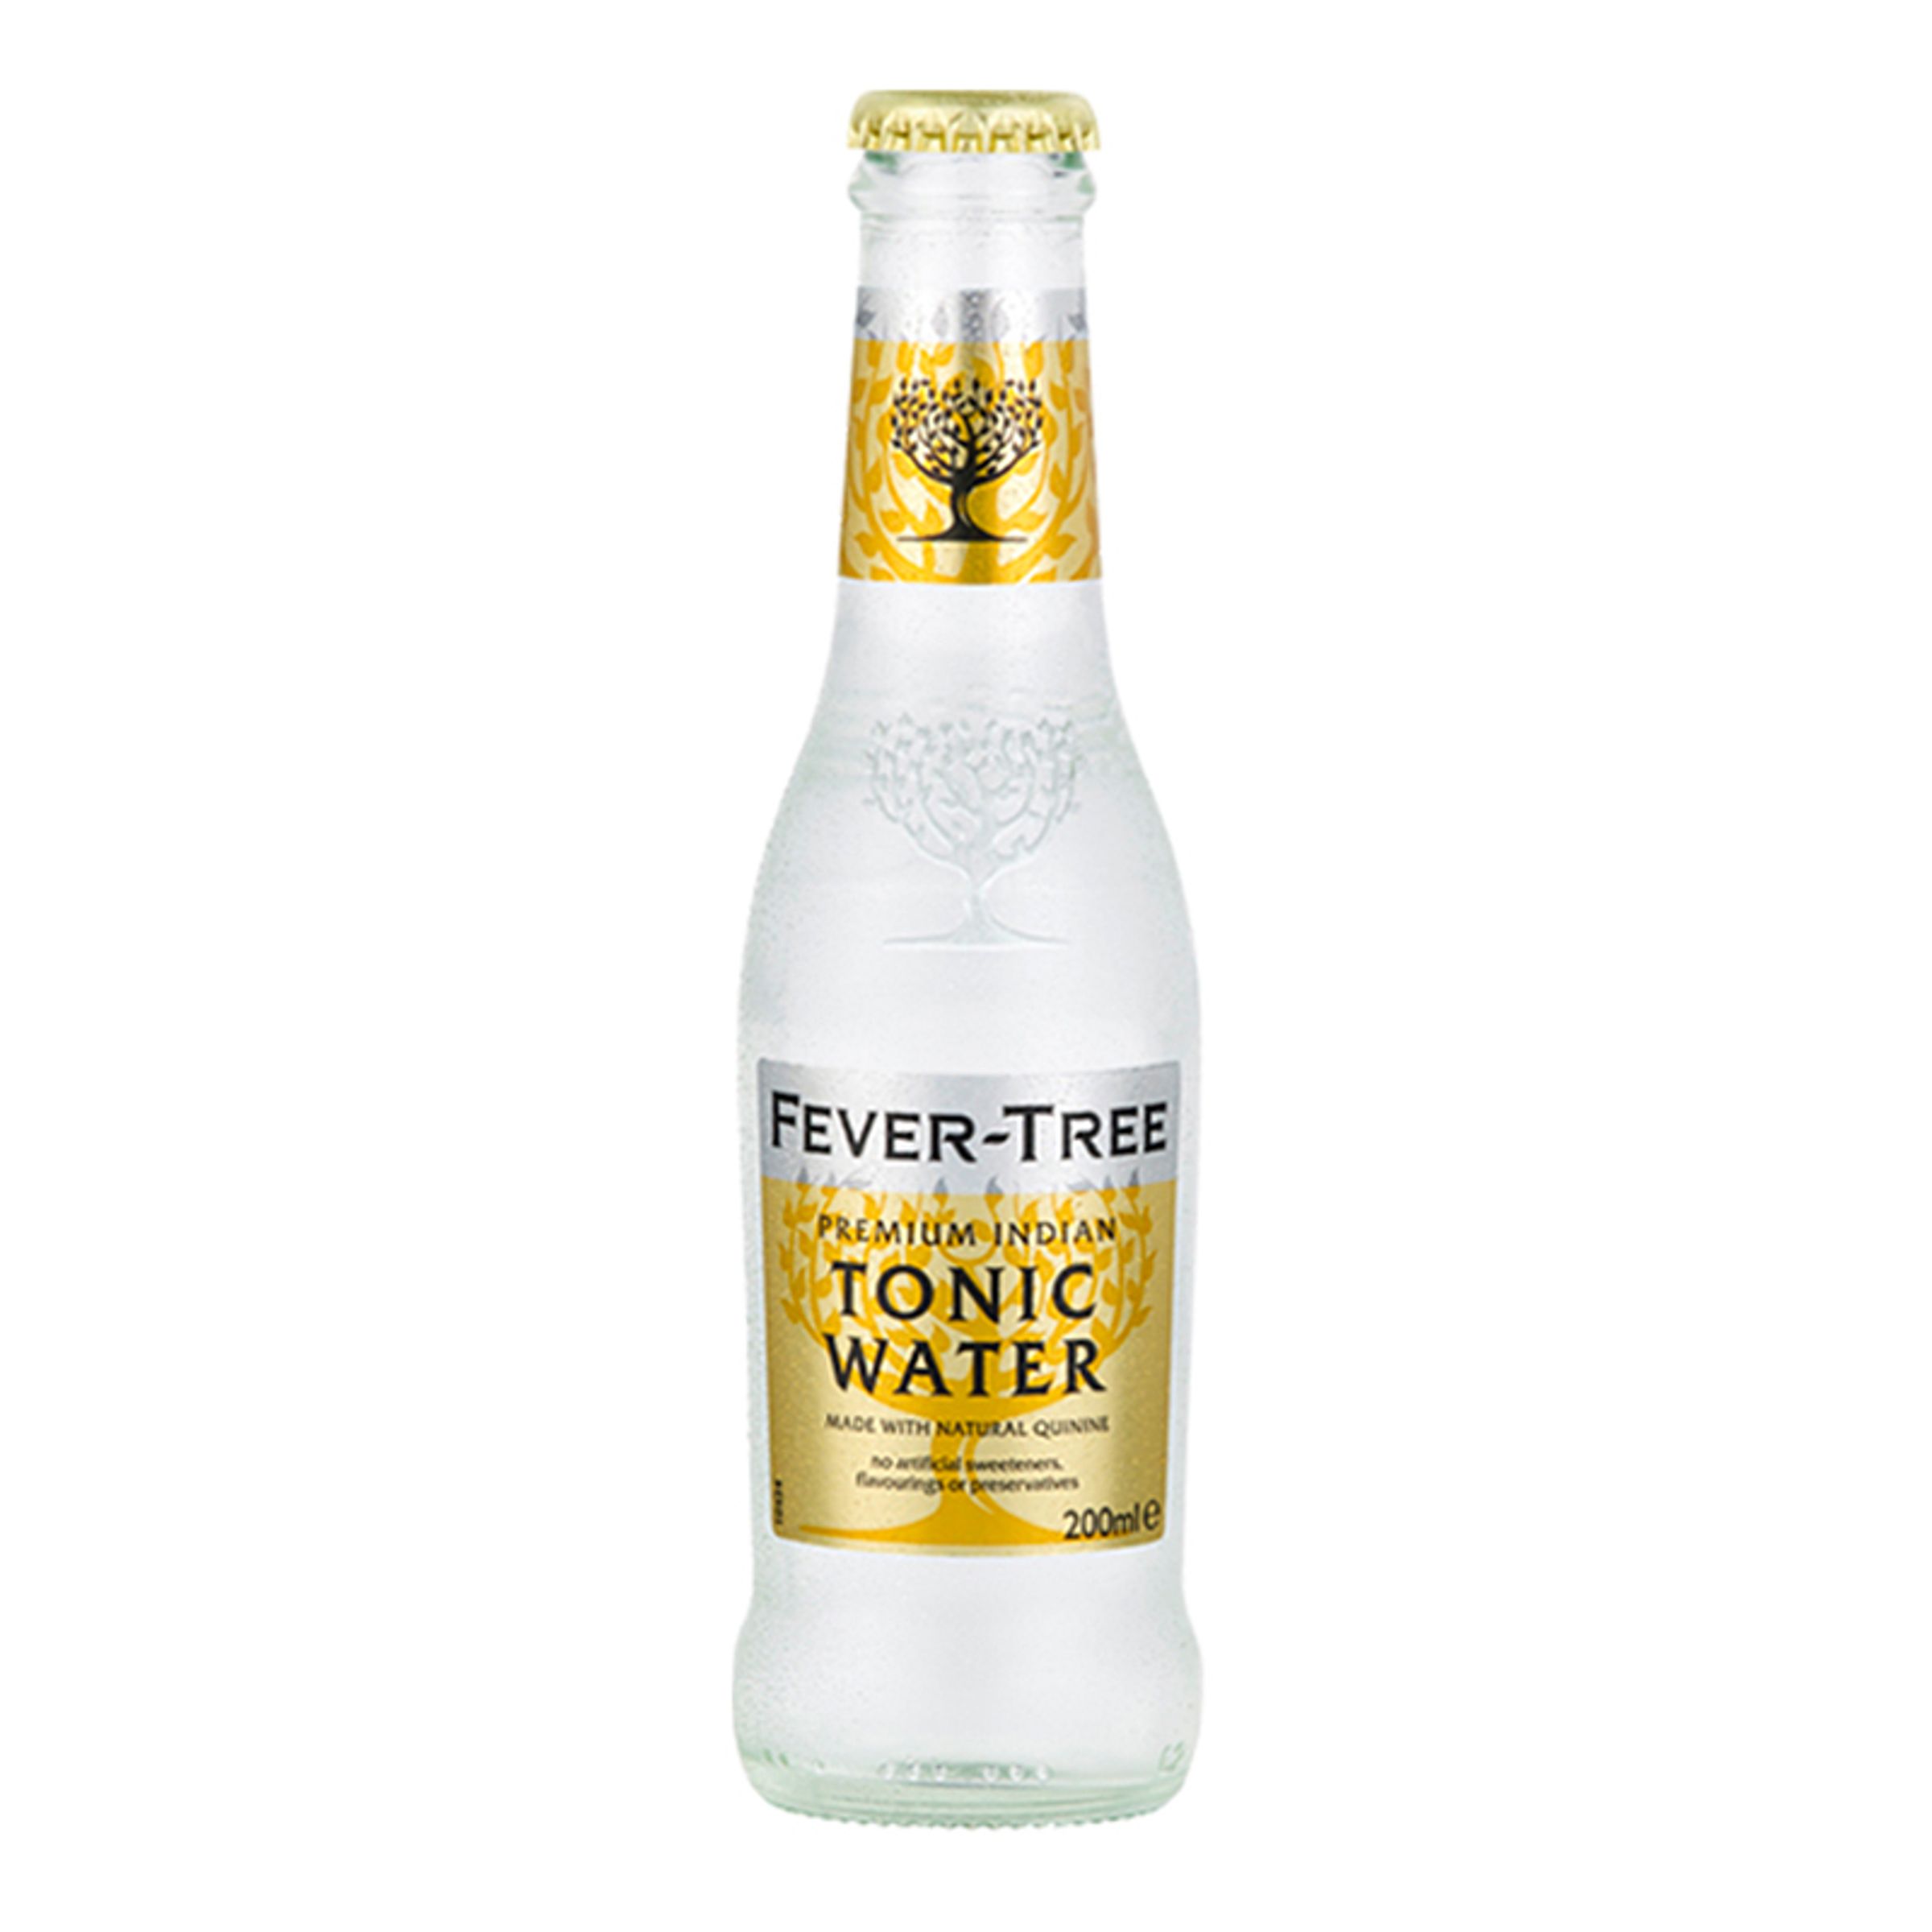 Fever-Tree Premium Indian Tonic Water - 1-pack